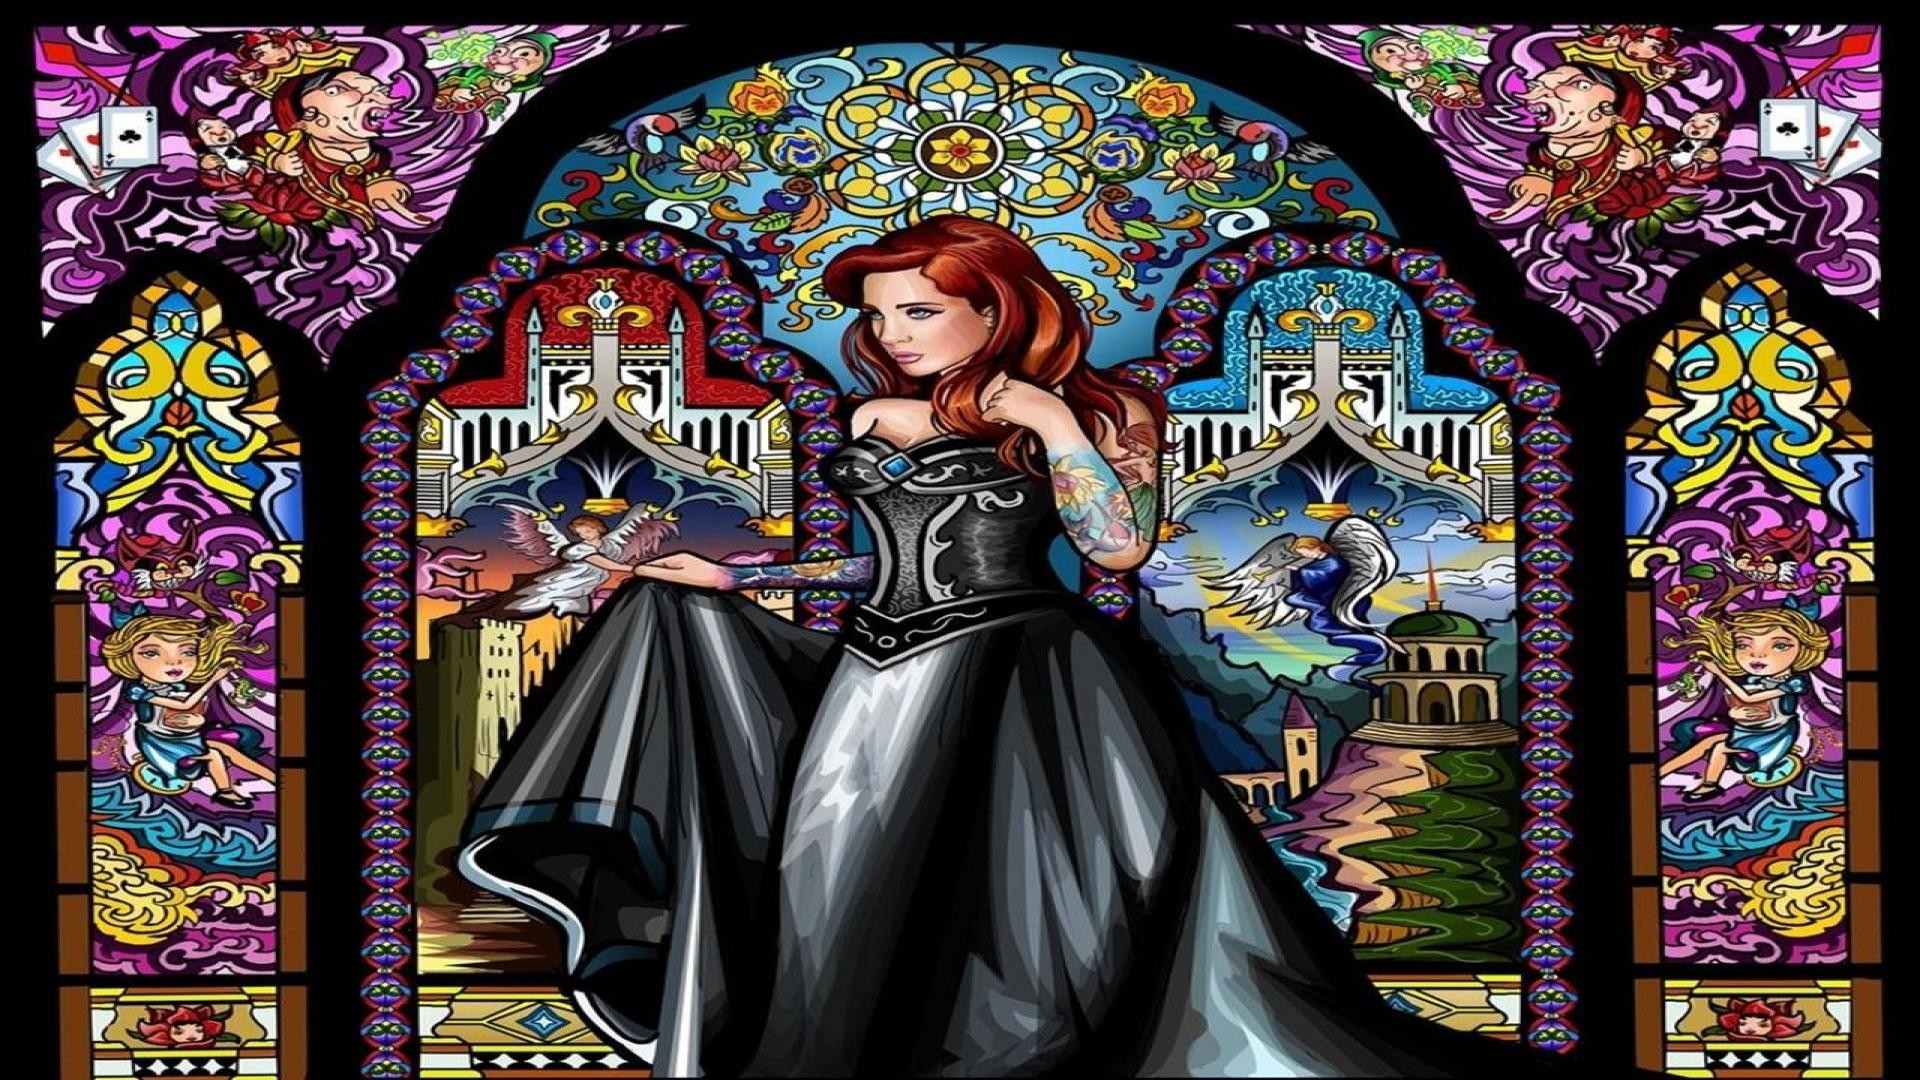 1920x1080, Stained Glass Wallpapers - Digital Stained Glass Art - HD Wallpaper 